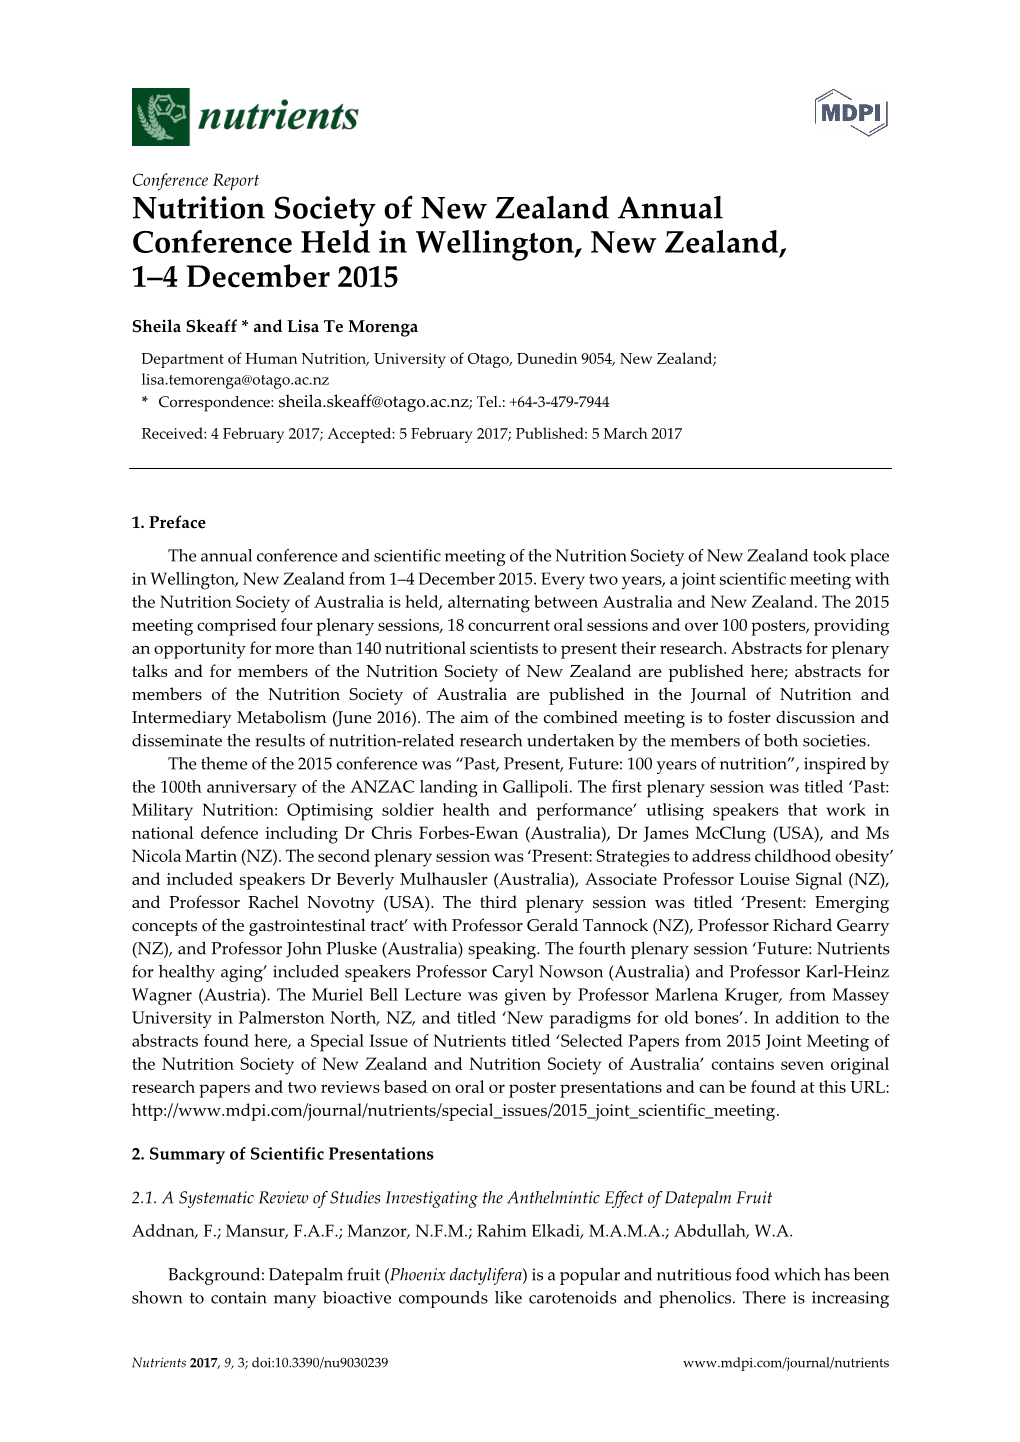 Meeting Report Nutrition Society of New Zealand Annual Conference Held in Wellington